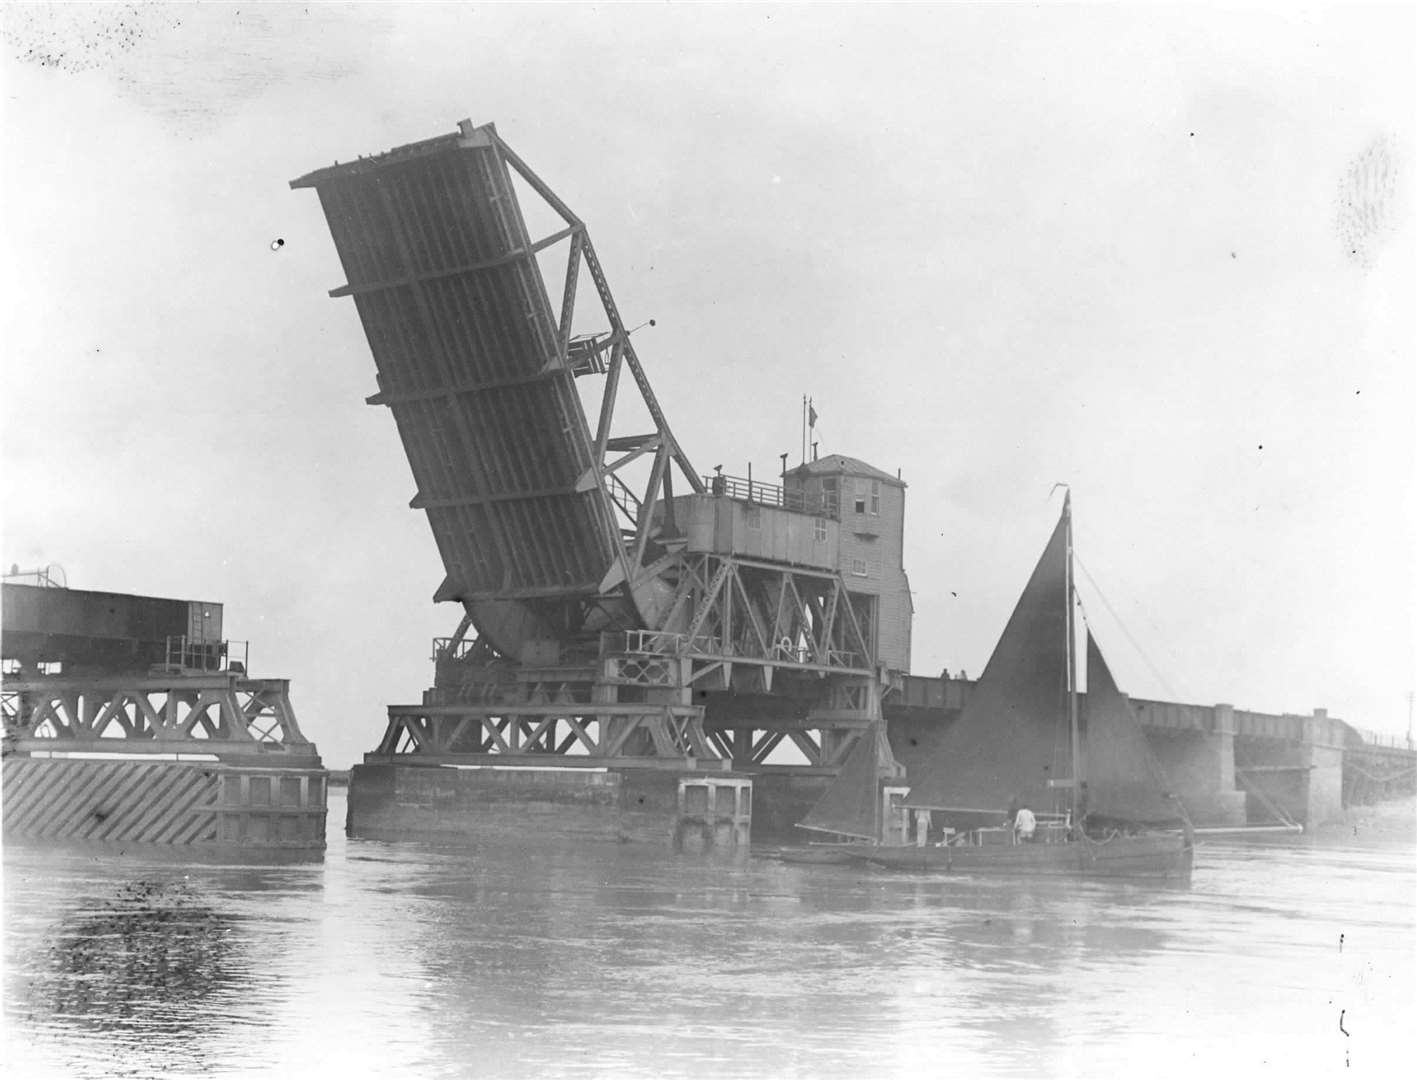 The previous Kingsferry Bridge with its lifting 'hinge'